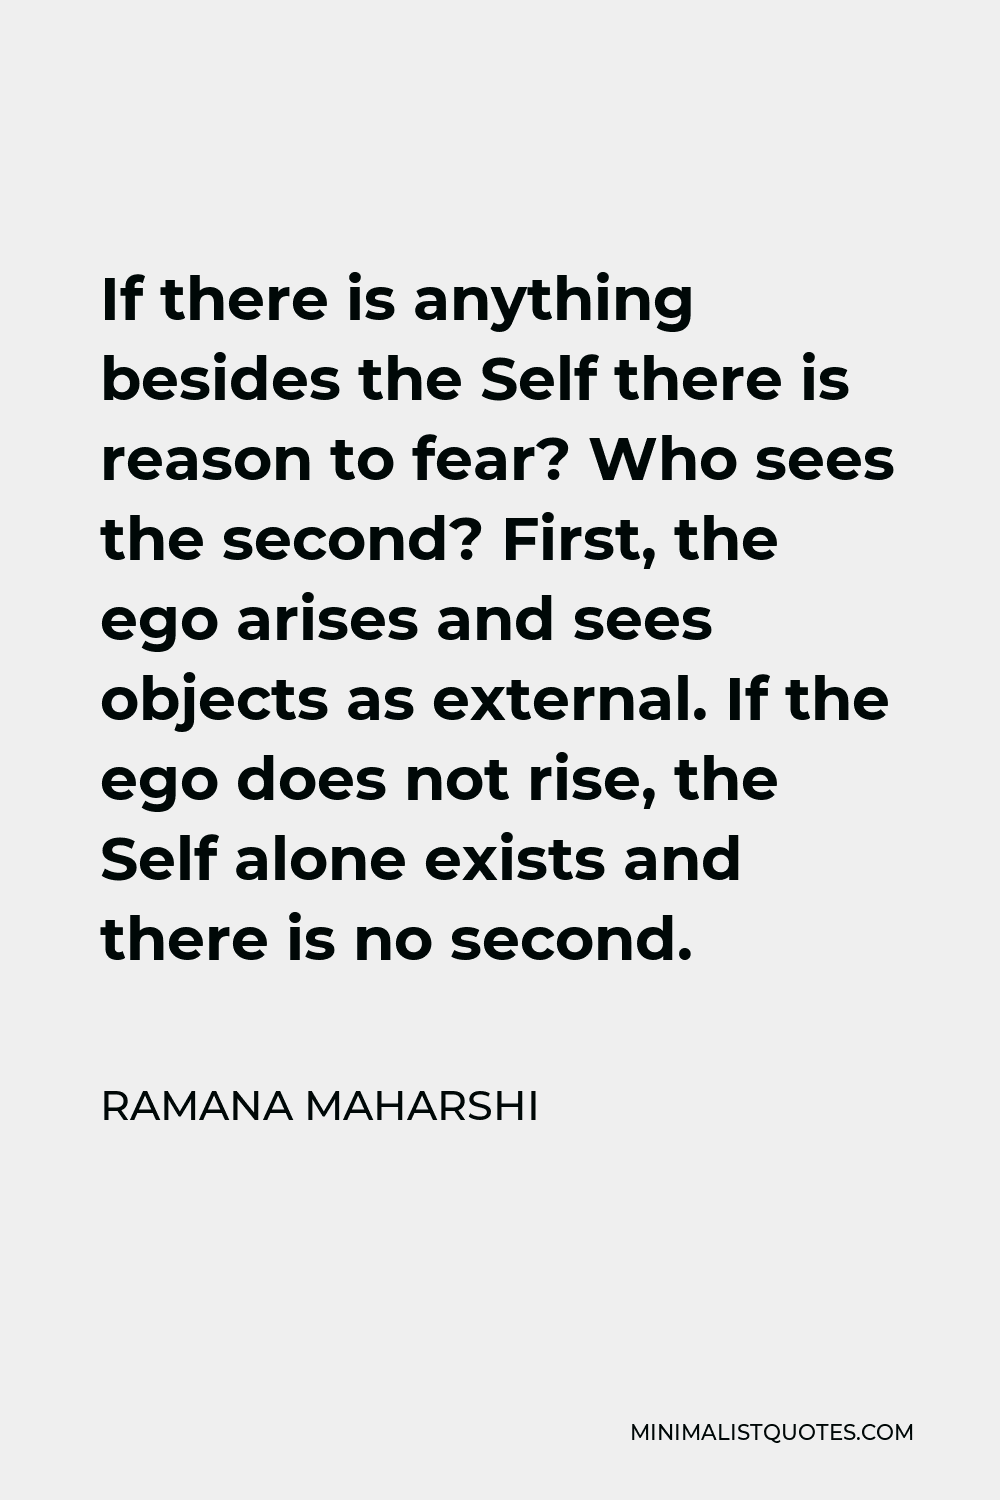 Ramana Maharshi Quote - If there is anything besides the Self there is reason to fear? Who sees the second? First, the ego arises and sees objects as external. If the ego does not rise, the Self alone exists and there is no second.